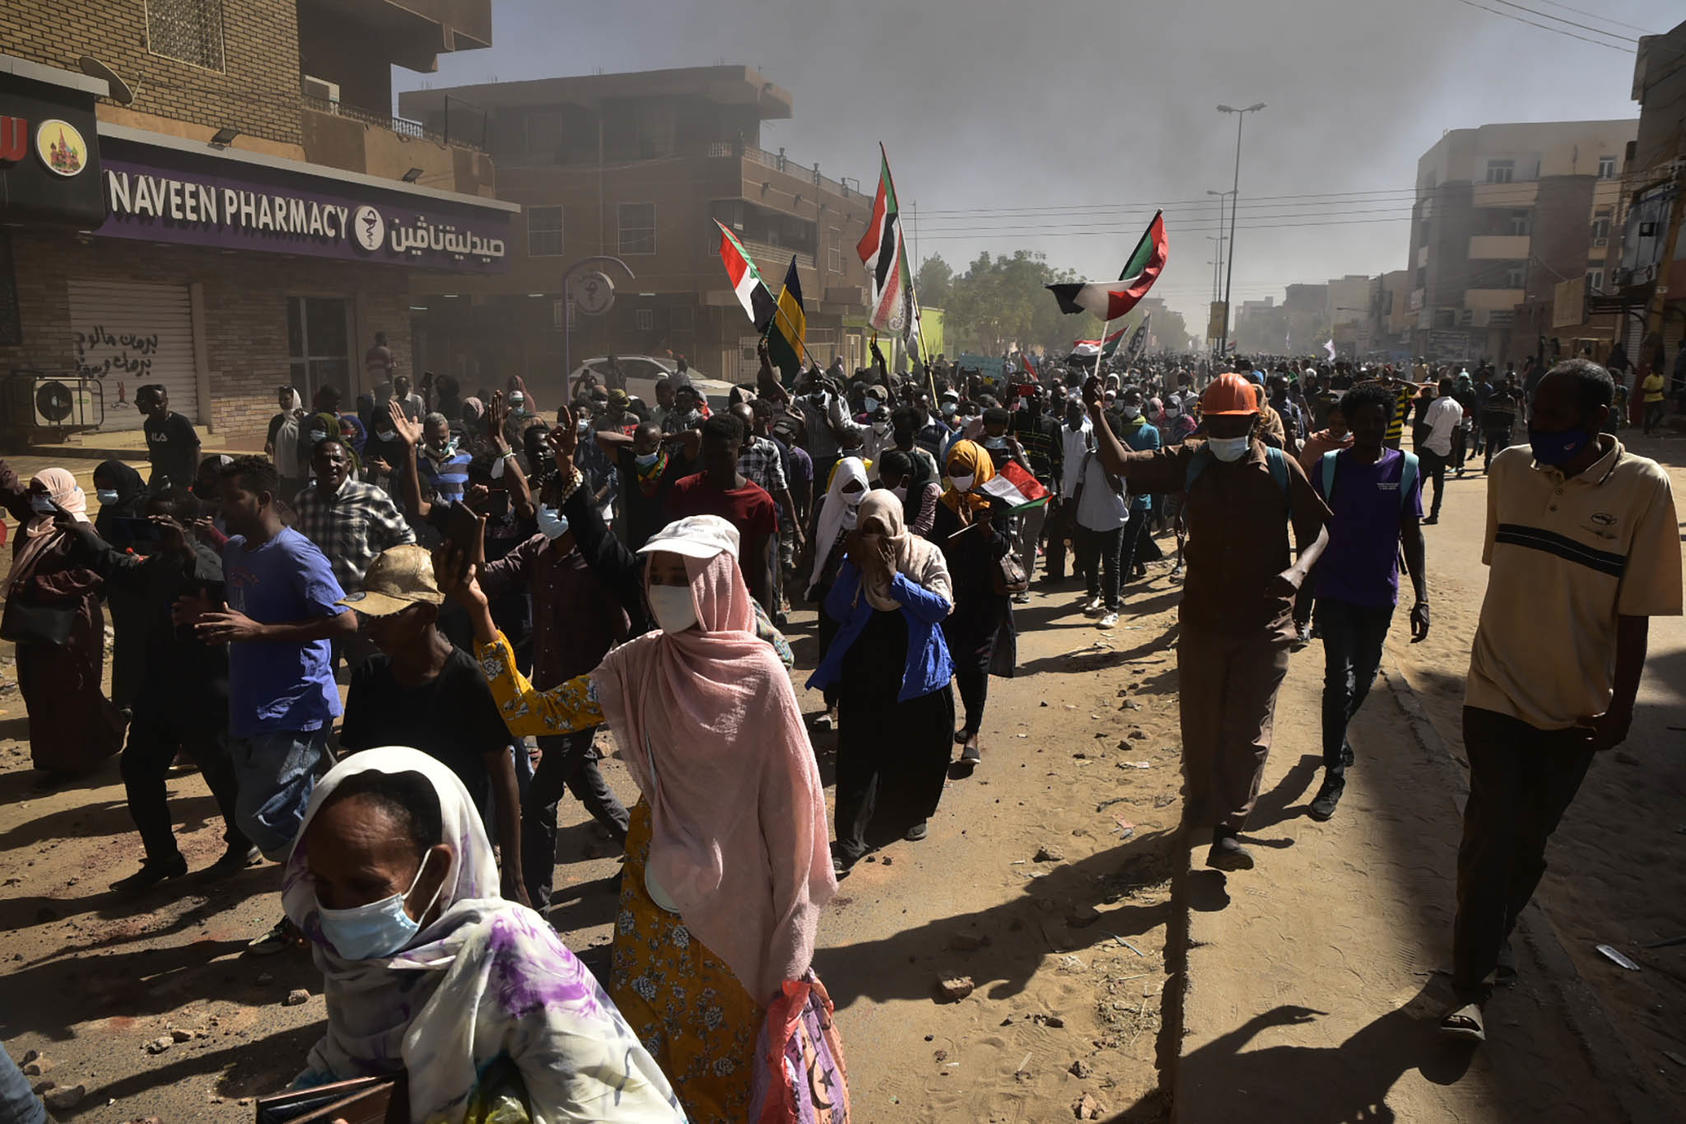 Sudanese march in Khartoum last January. Sudan’s hundreds of street protests over four years, demanding democratic instead of military rule, represent one of Africa’s most resilient pro-democracy movements. (Faiz Abubakar Muhamed/The New York Times)